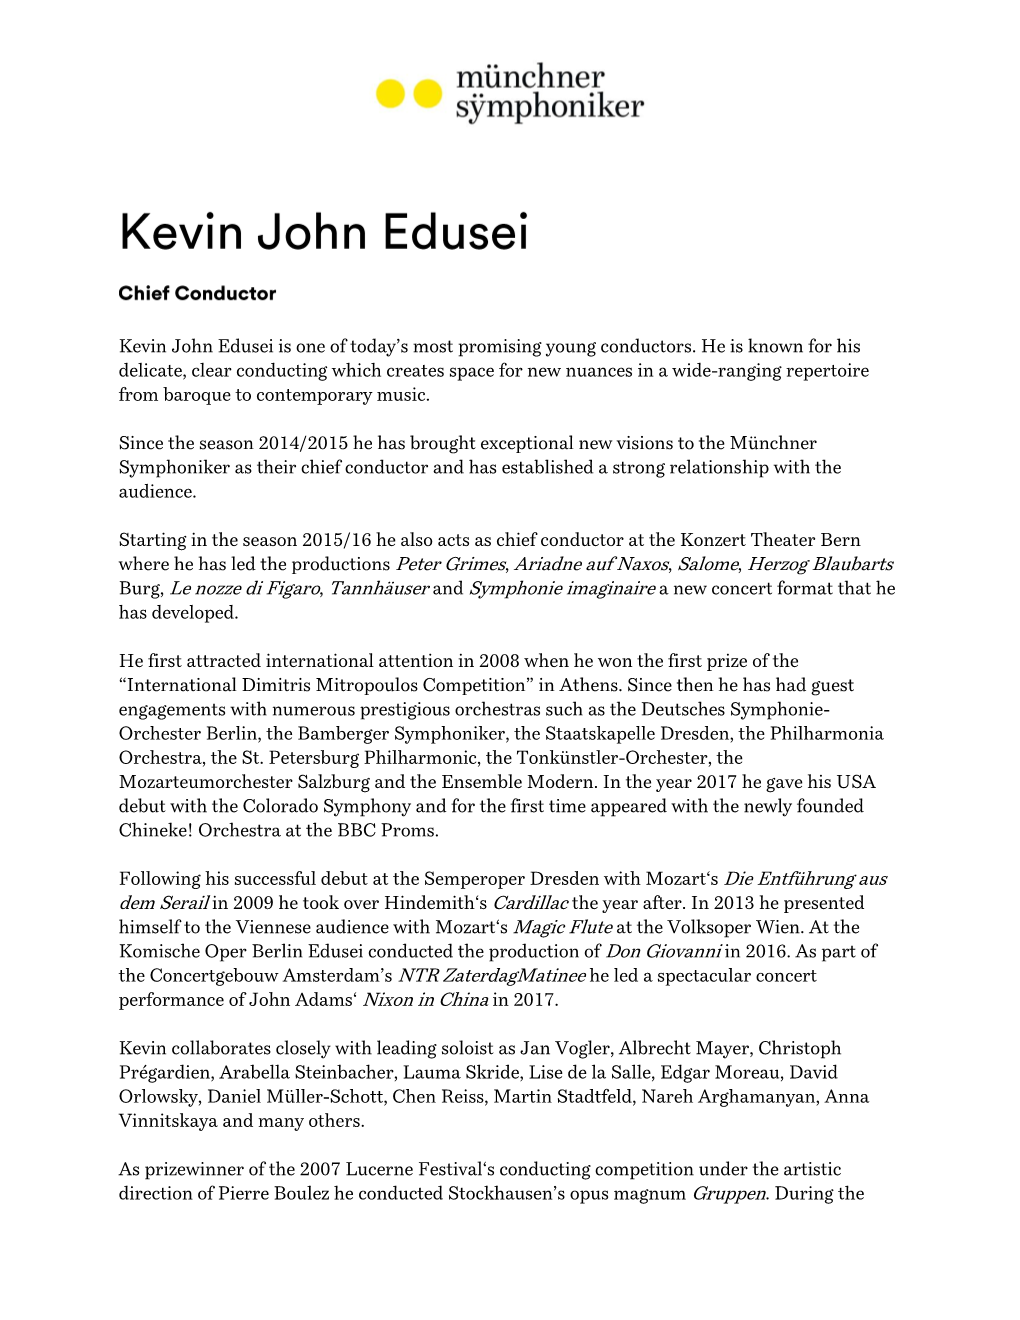 Kevin John Edusei Is One of Today's Most Promising Young